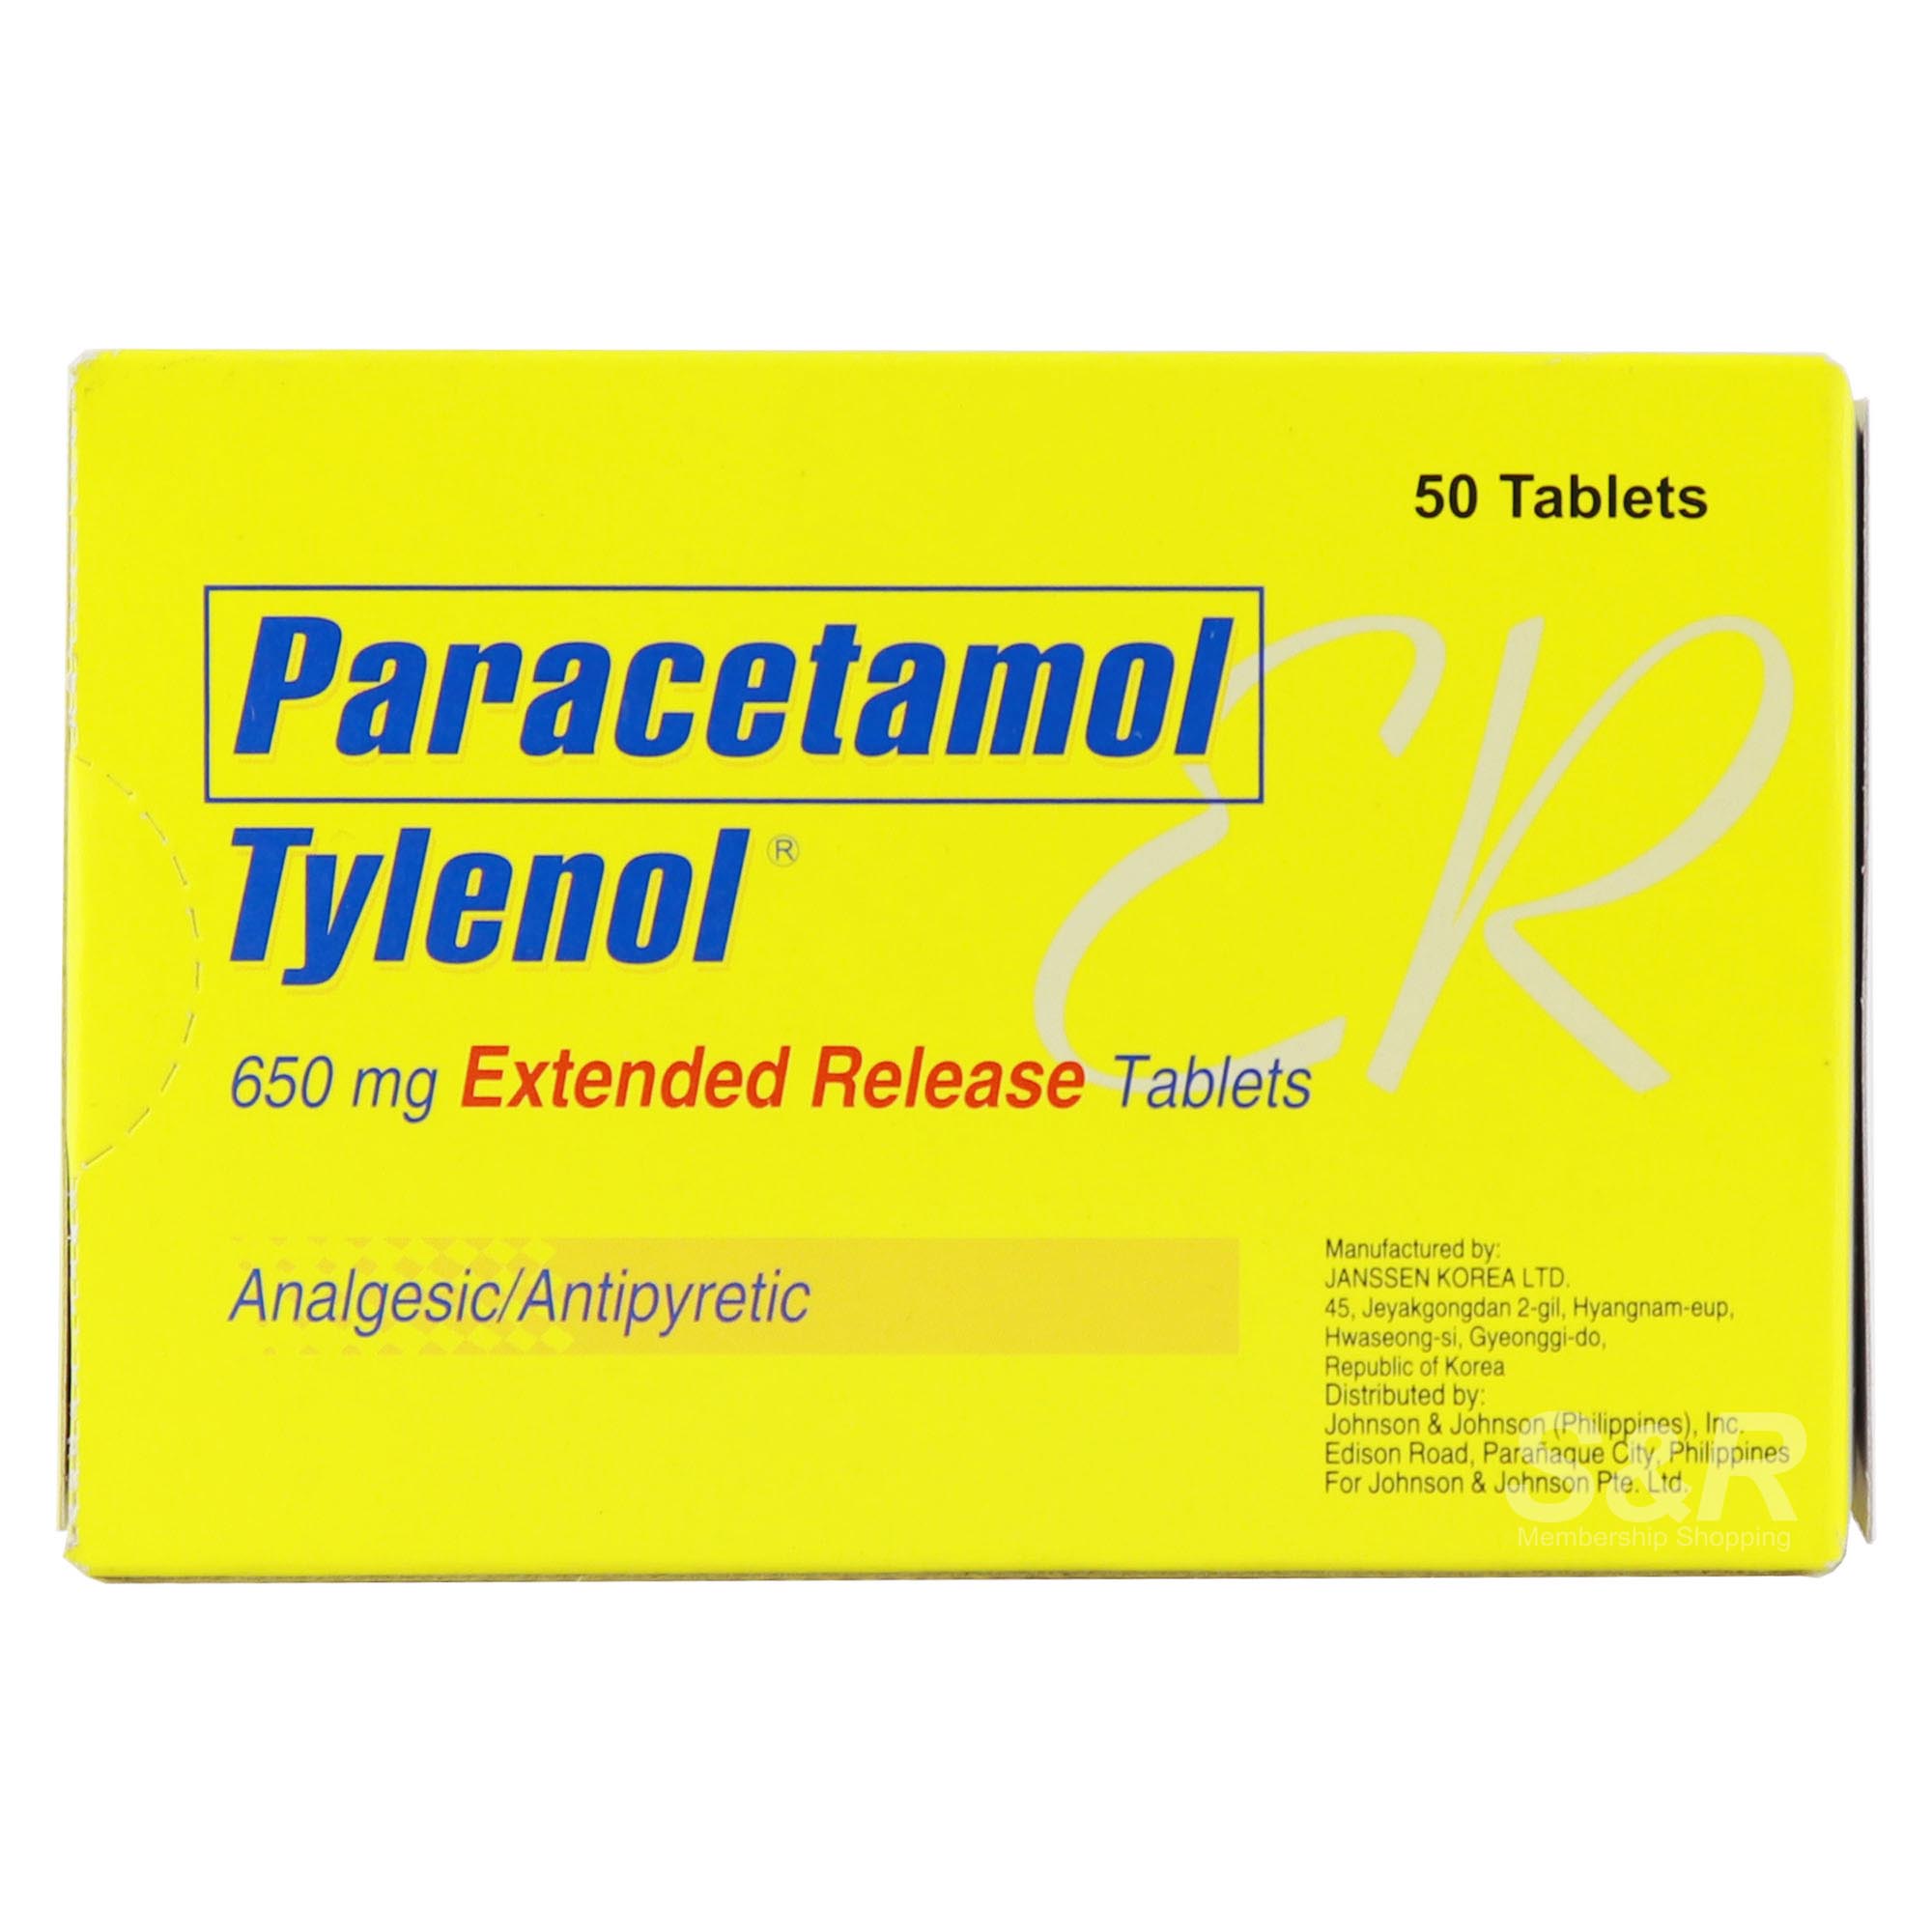 Tylenol Extended Release Tablets 650mg 50 tablets